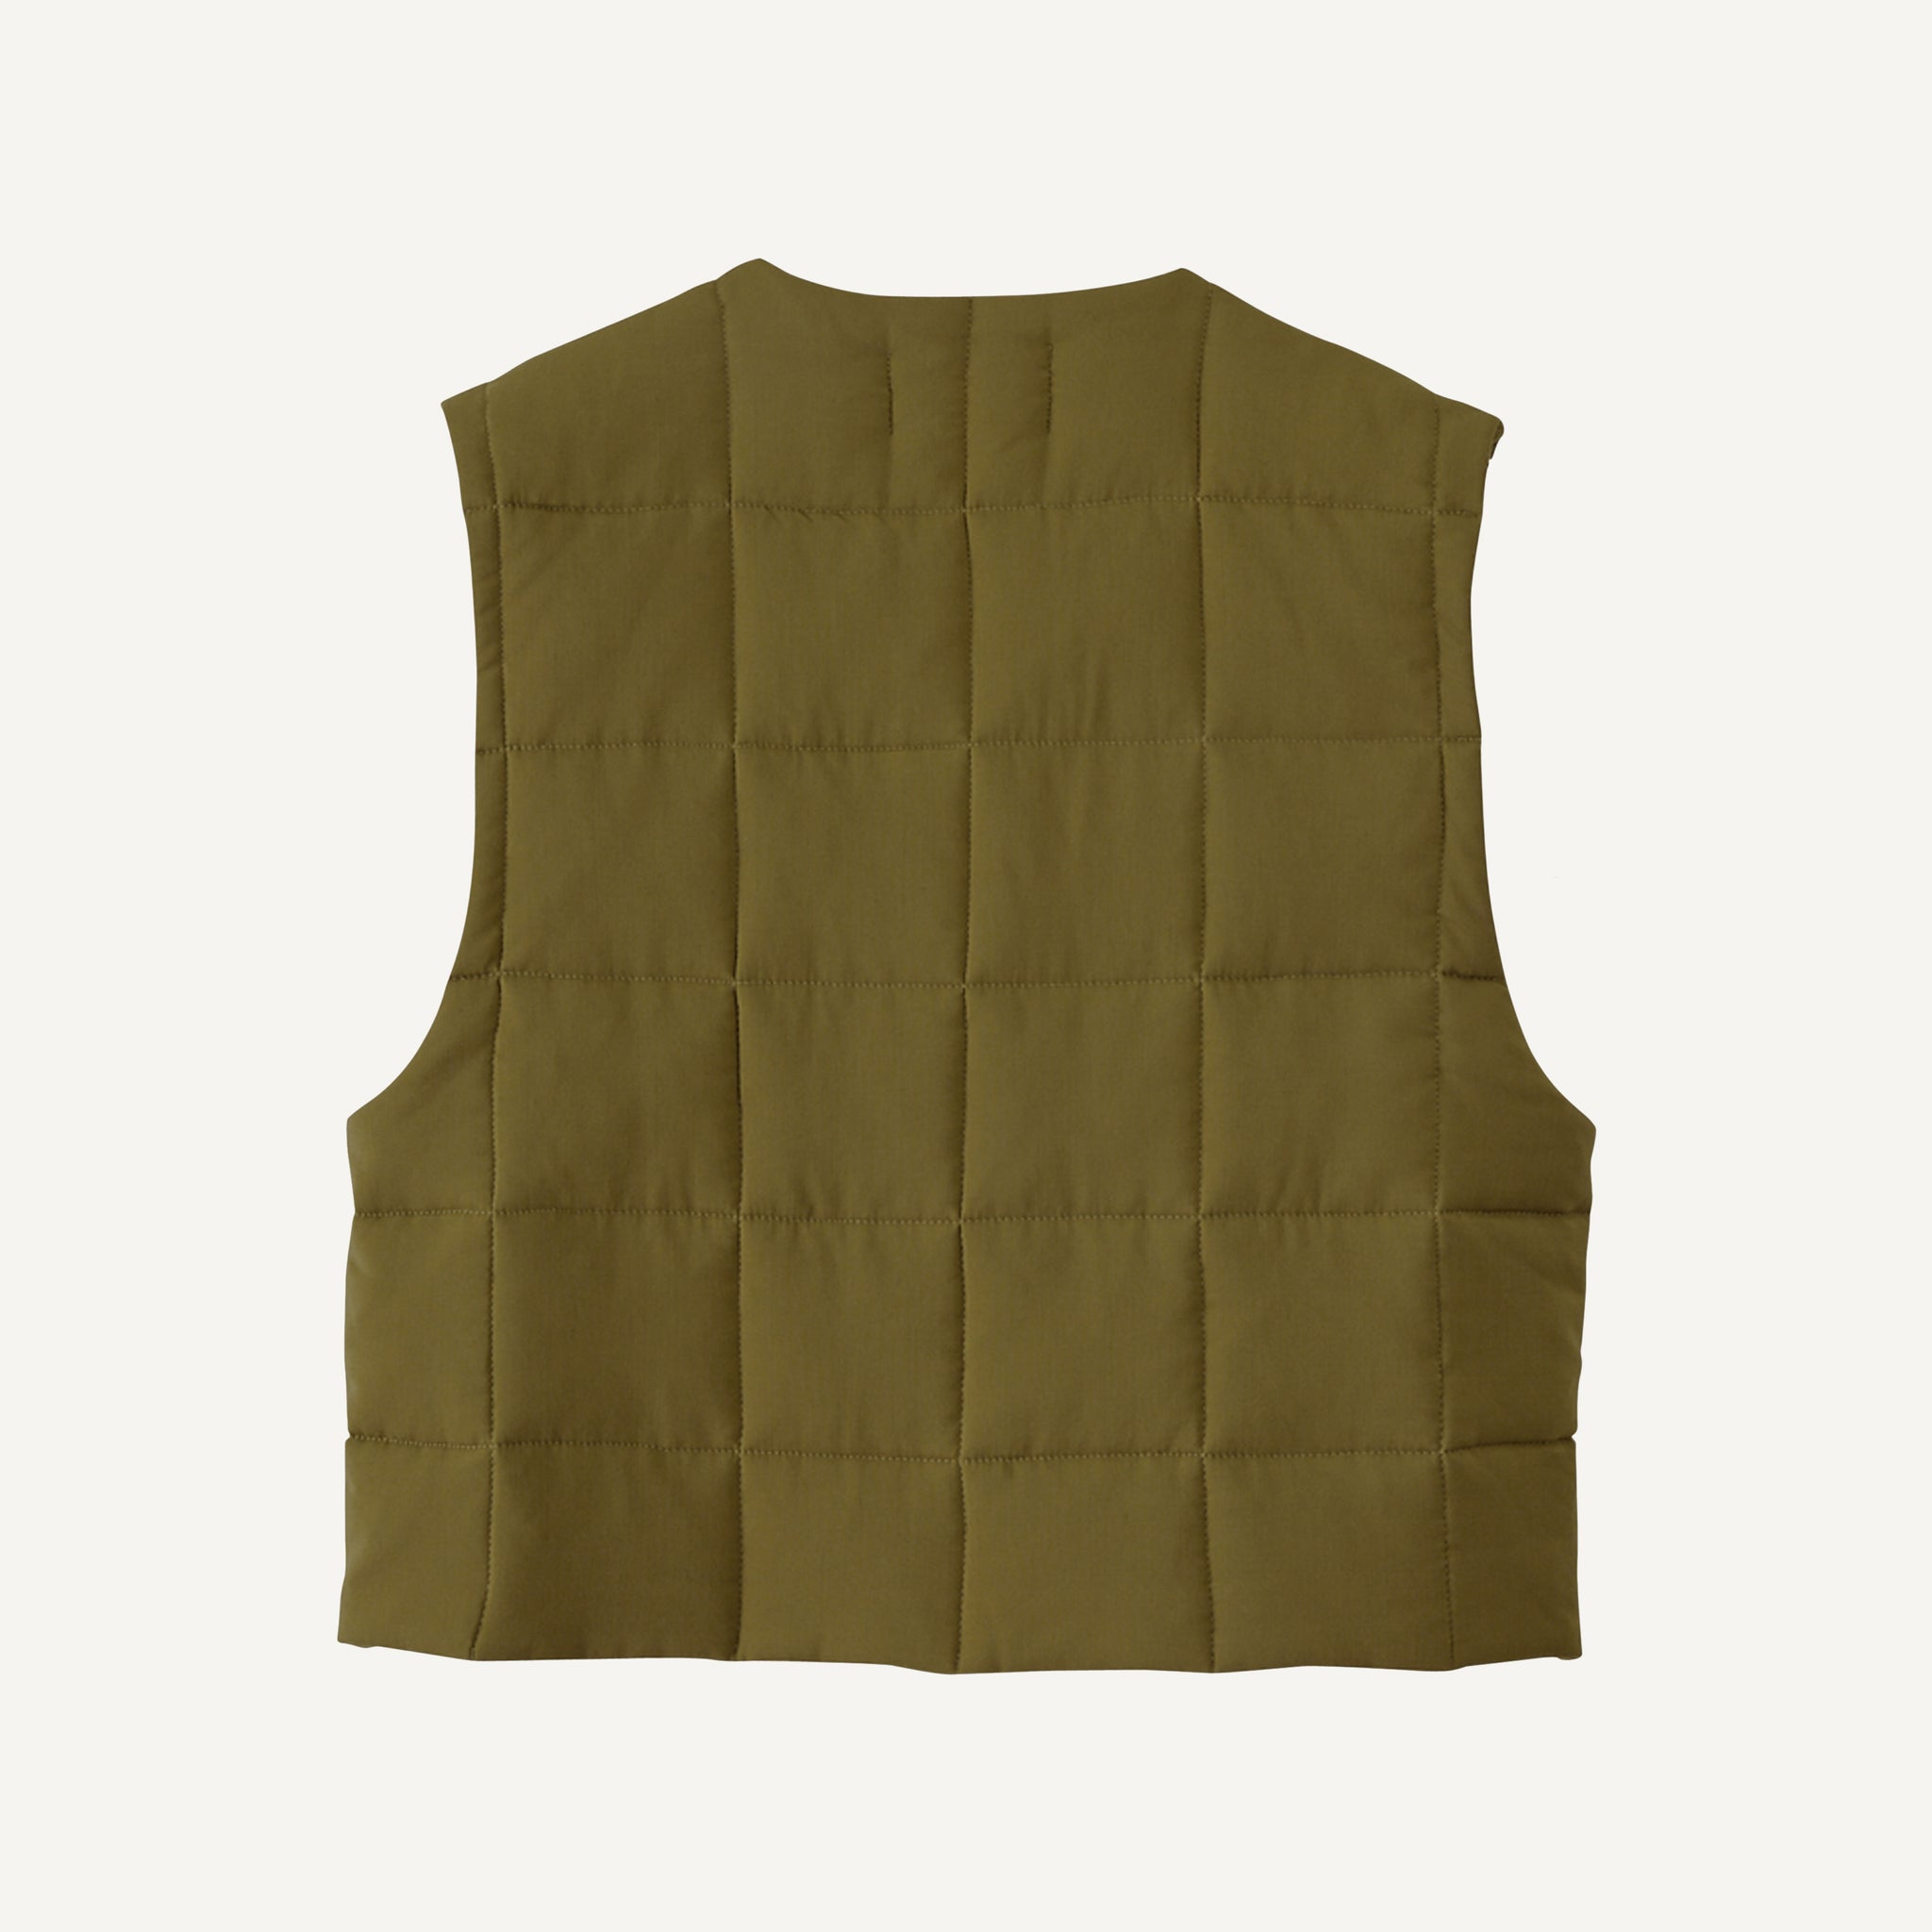 LEMAIRE QUILTED GILET